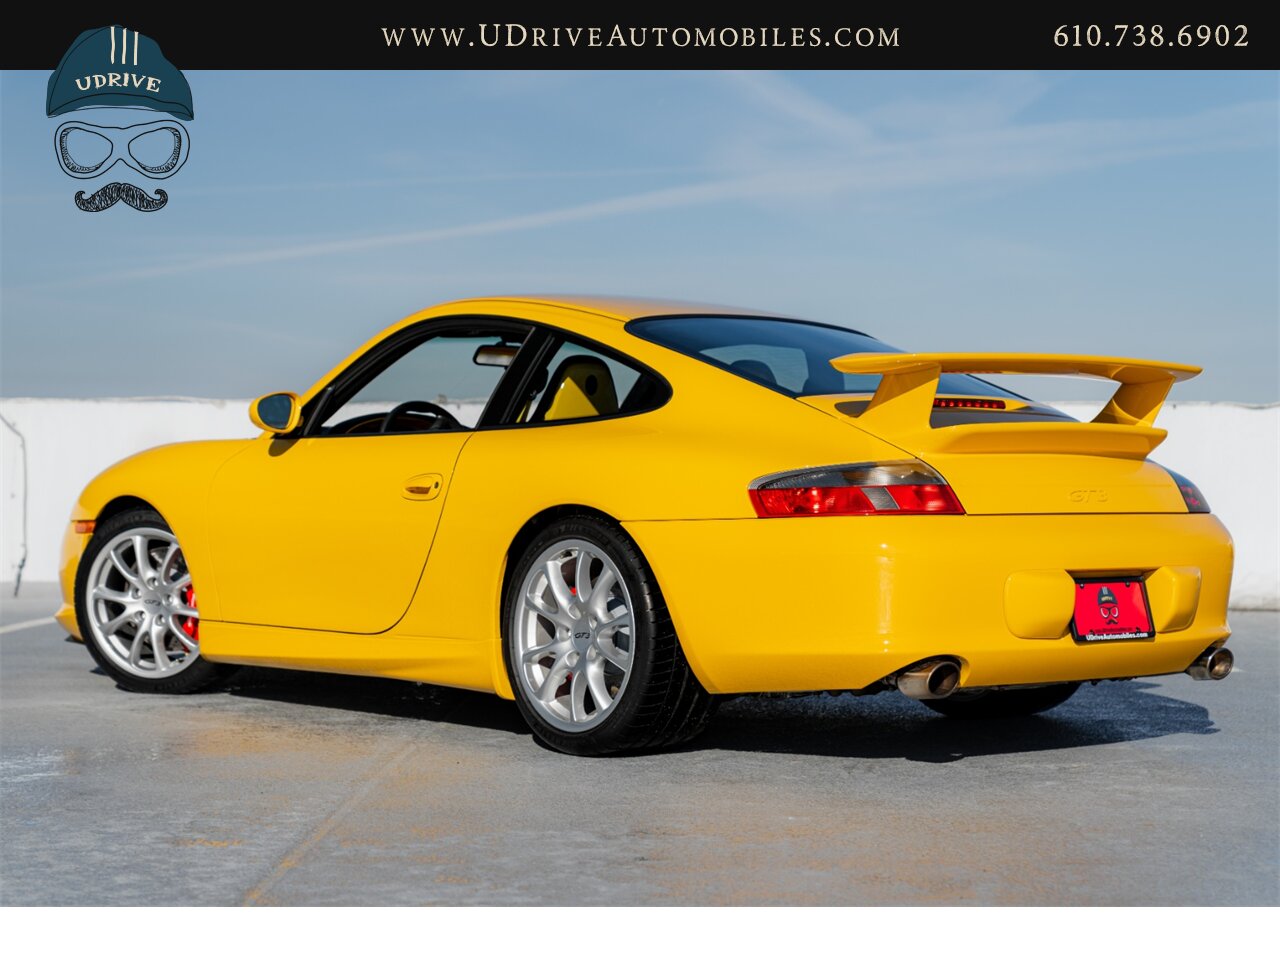 2005 Porsche 911 GT3 996 Speed Yellow Sport Seats Pntd Hardbacks  Pntd Console Deviating Stitch Yellow Accents Throughout - Photo 5 - West Chester, PA 19382